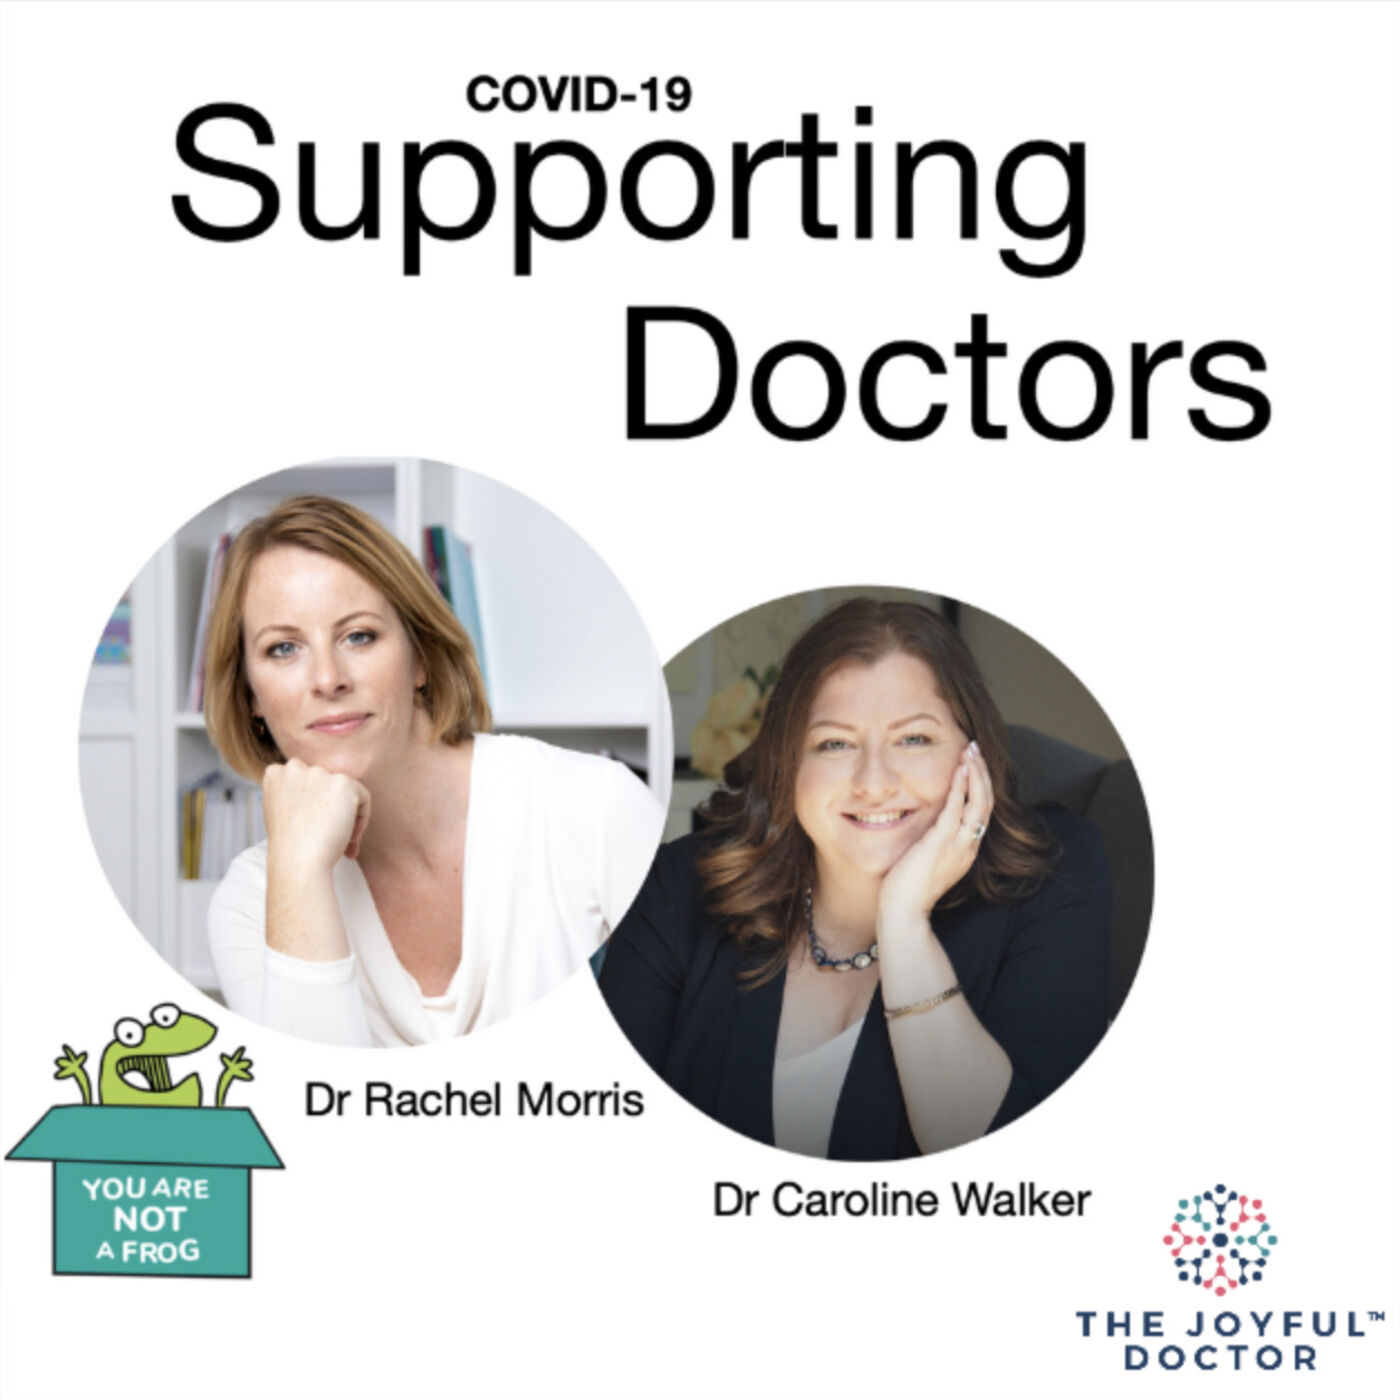 COVID-19 Supporting Doctors. COVID Fatigue – What’s Going on, and What We Can Do About it